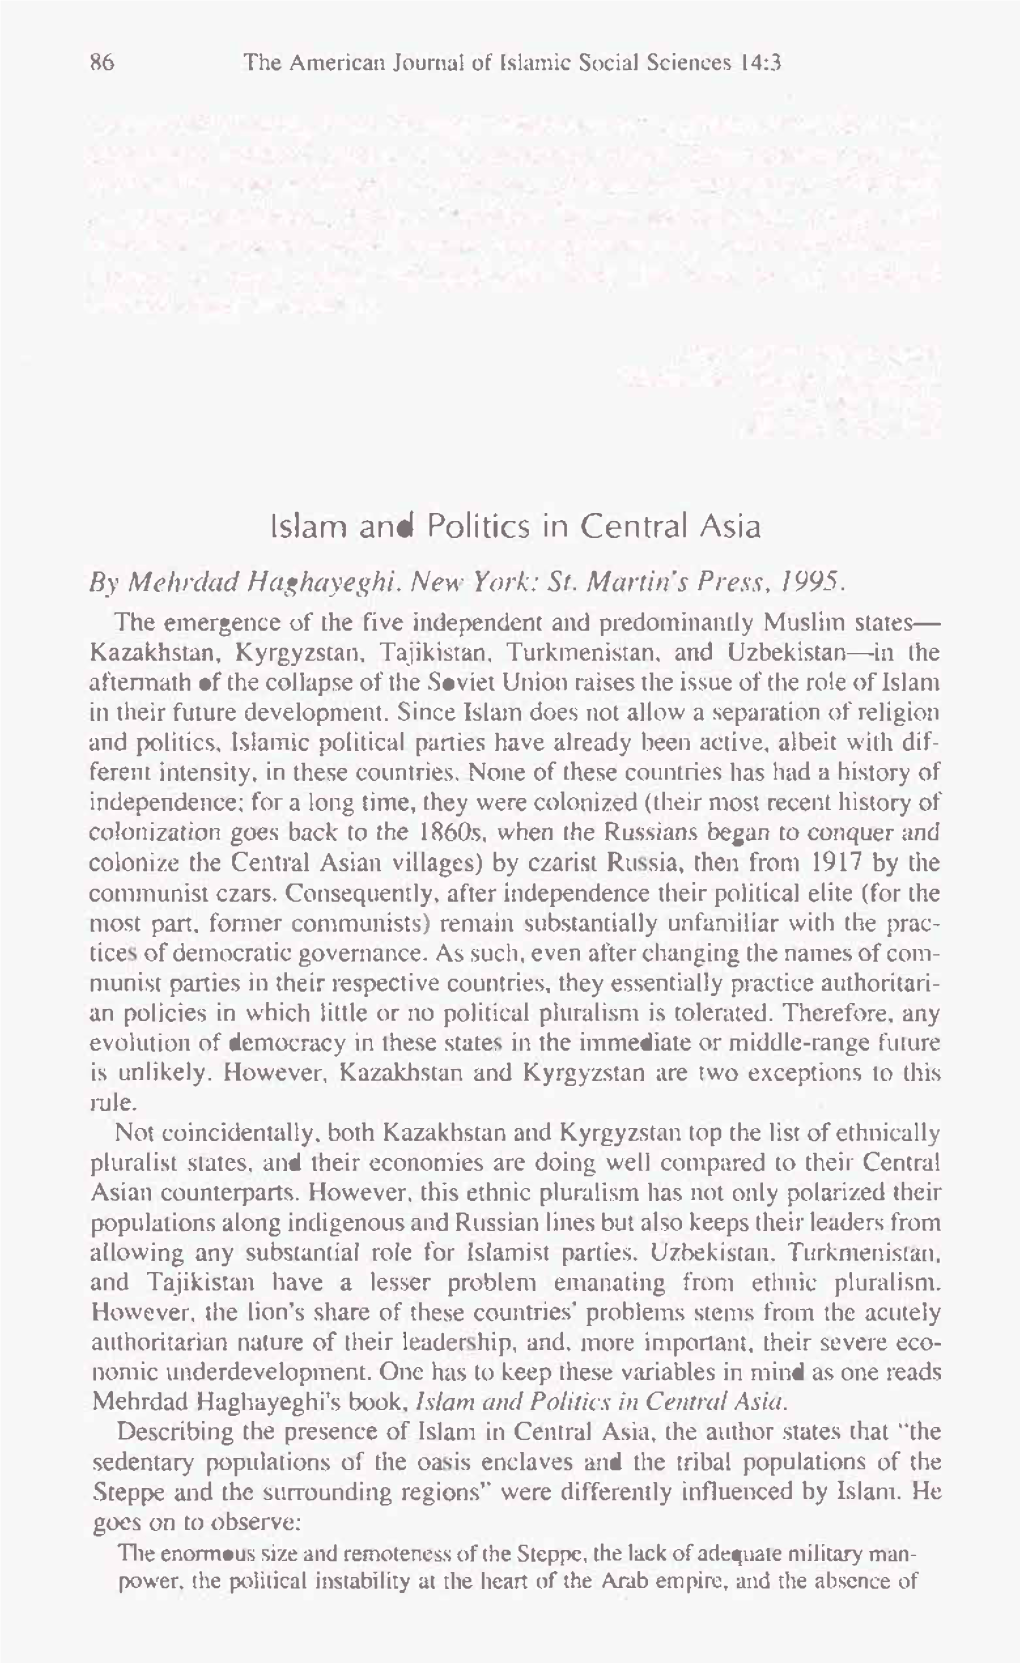 Islam and Politics in Central Asia by Mehrdad Haghayeghi